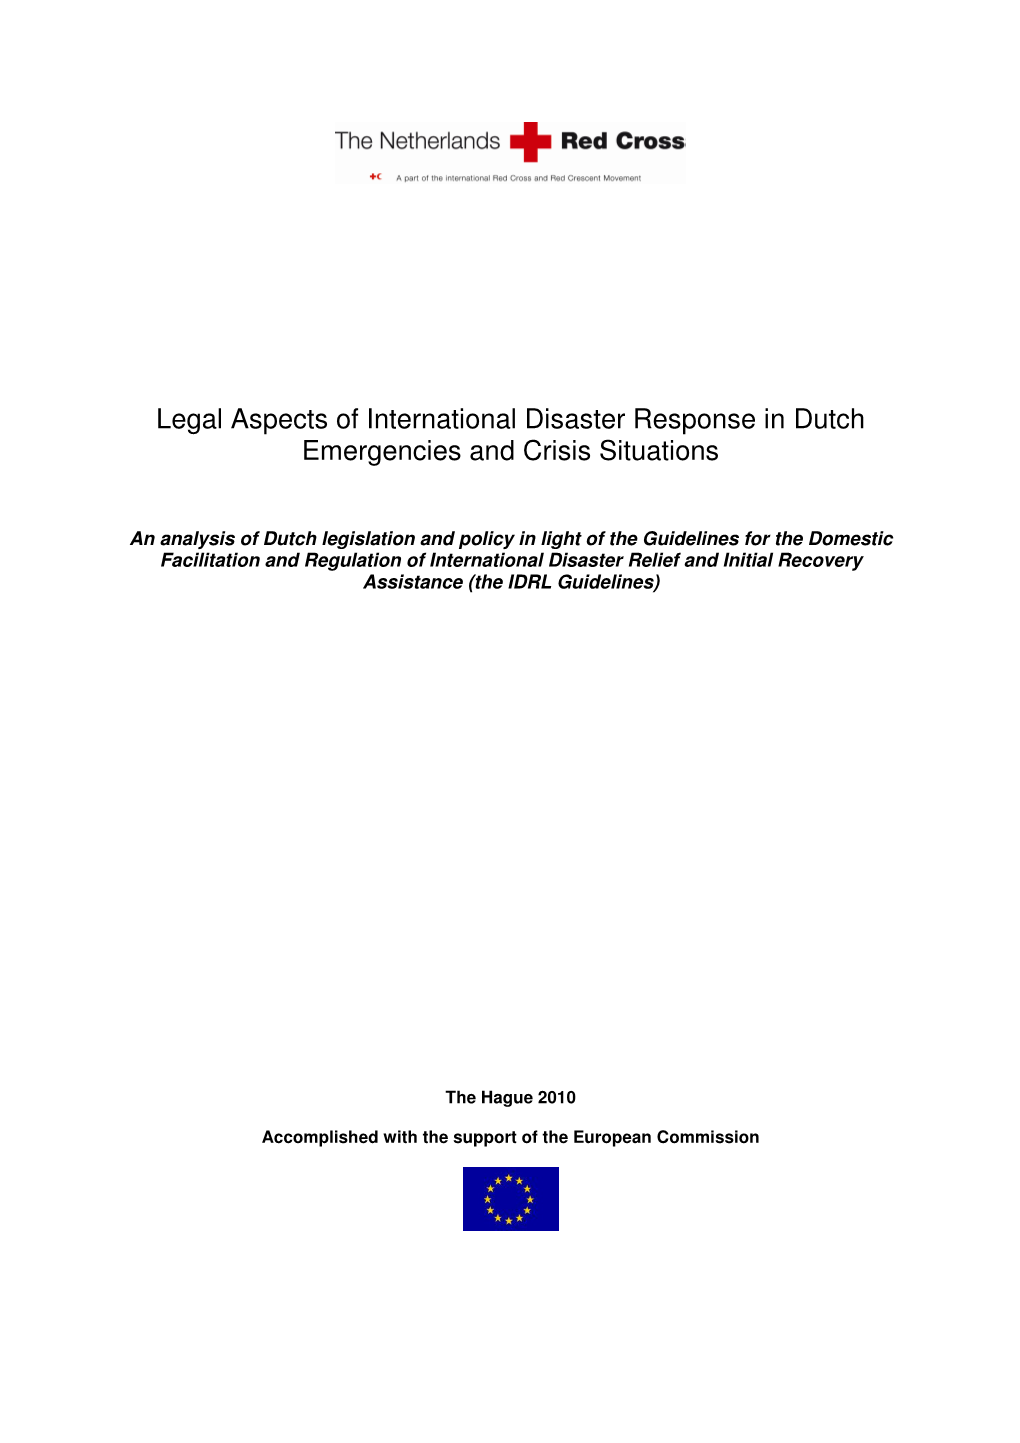 Legal Aspects of International Disaster Response in Dutch Emergencies and Crisis Situations